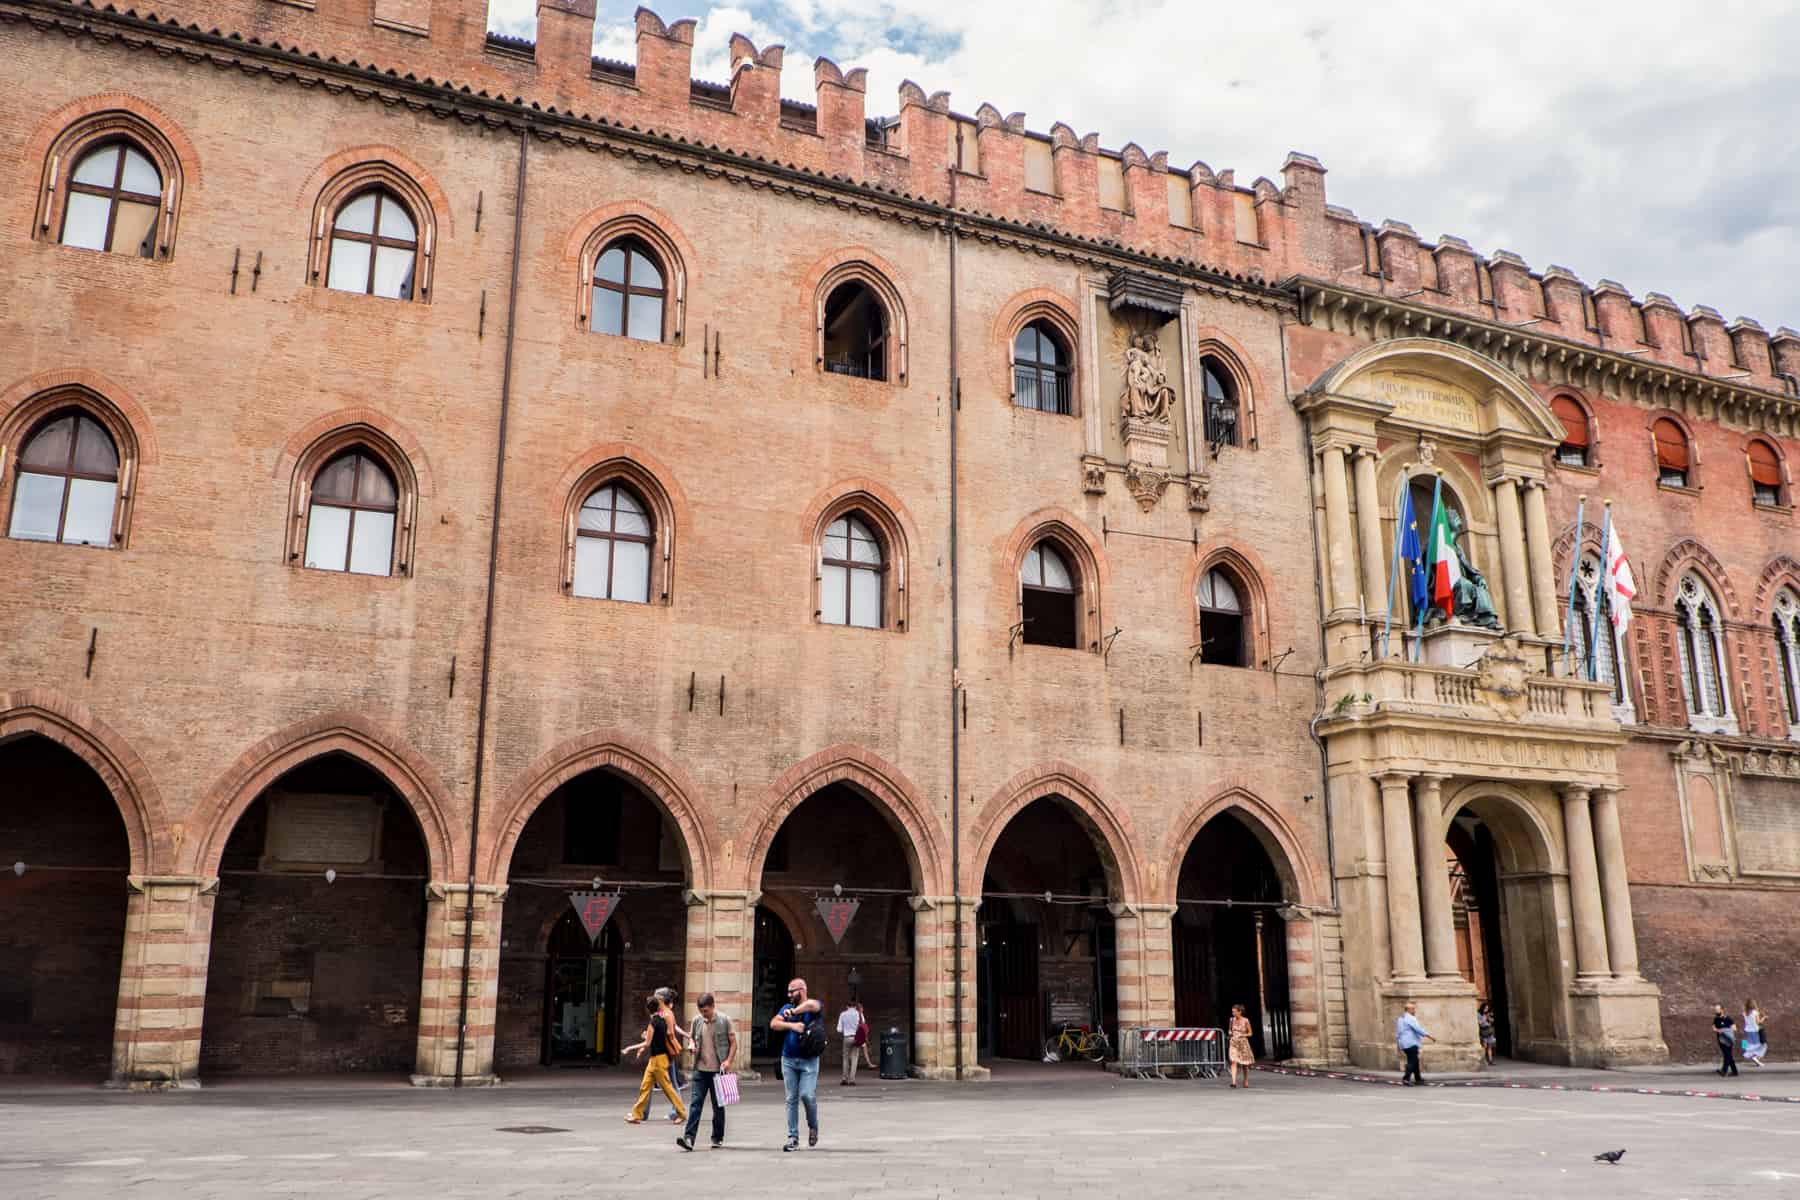 A long orange-brown castle looking structure with archways, rooftop turrets and a yellow-stone columned entrance door is the oldest university in the world in Bologna.